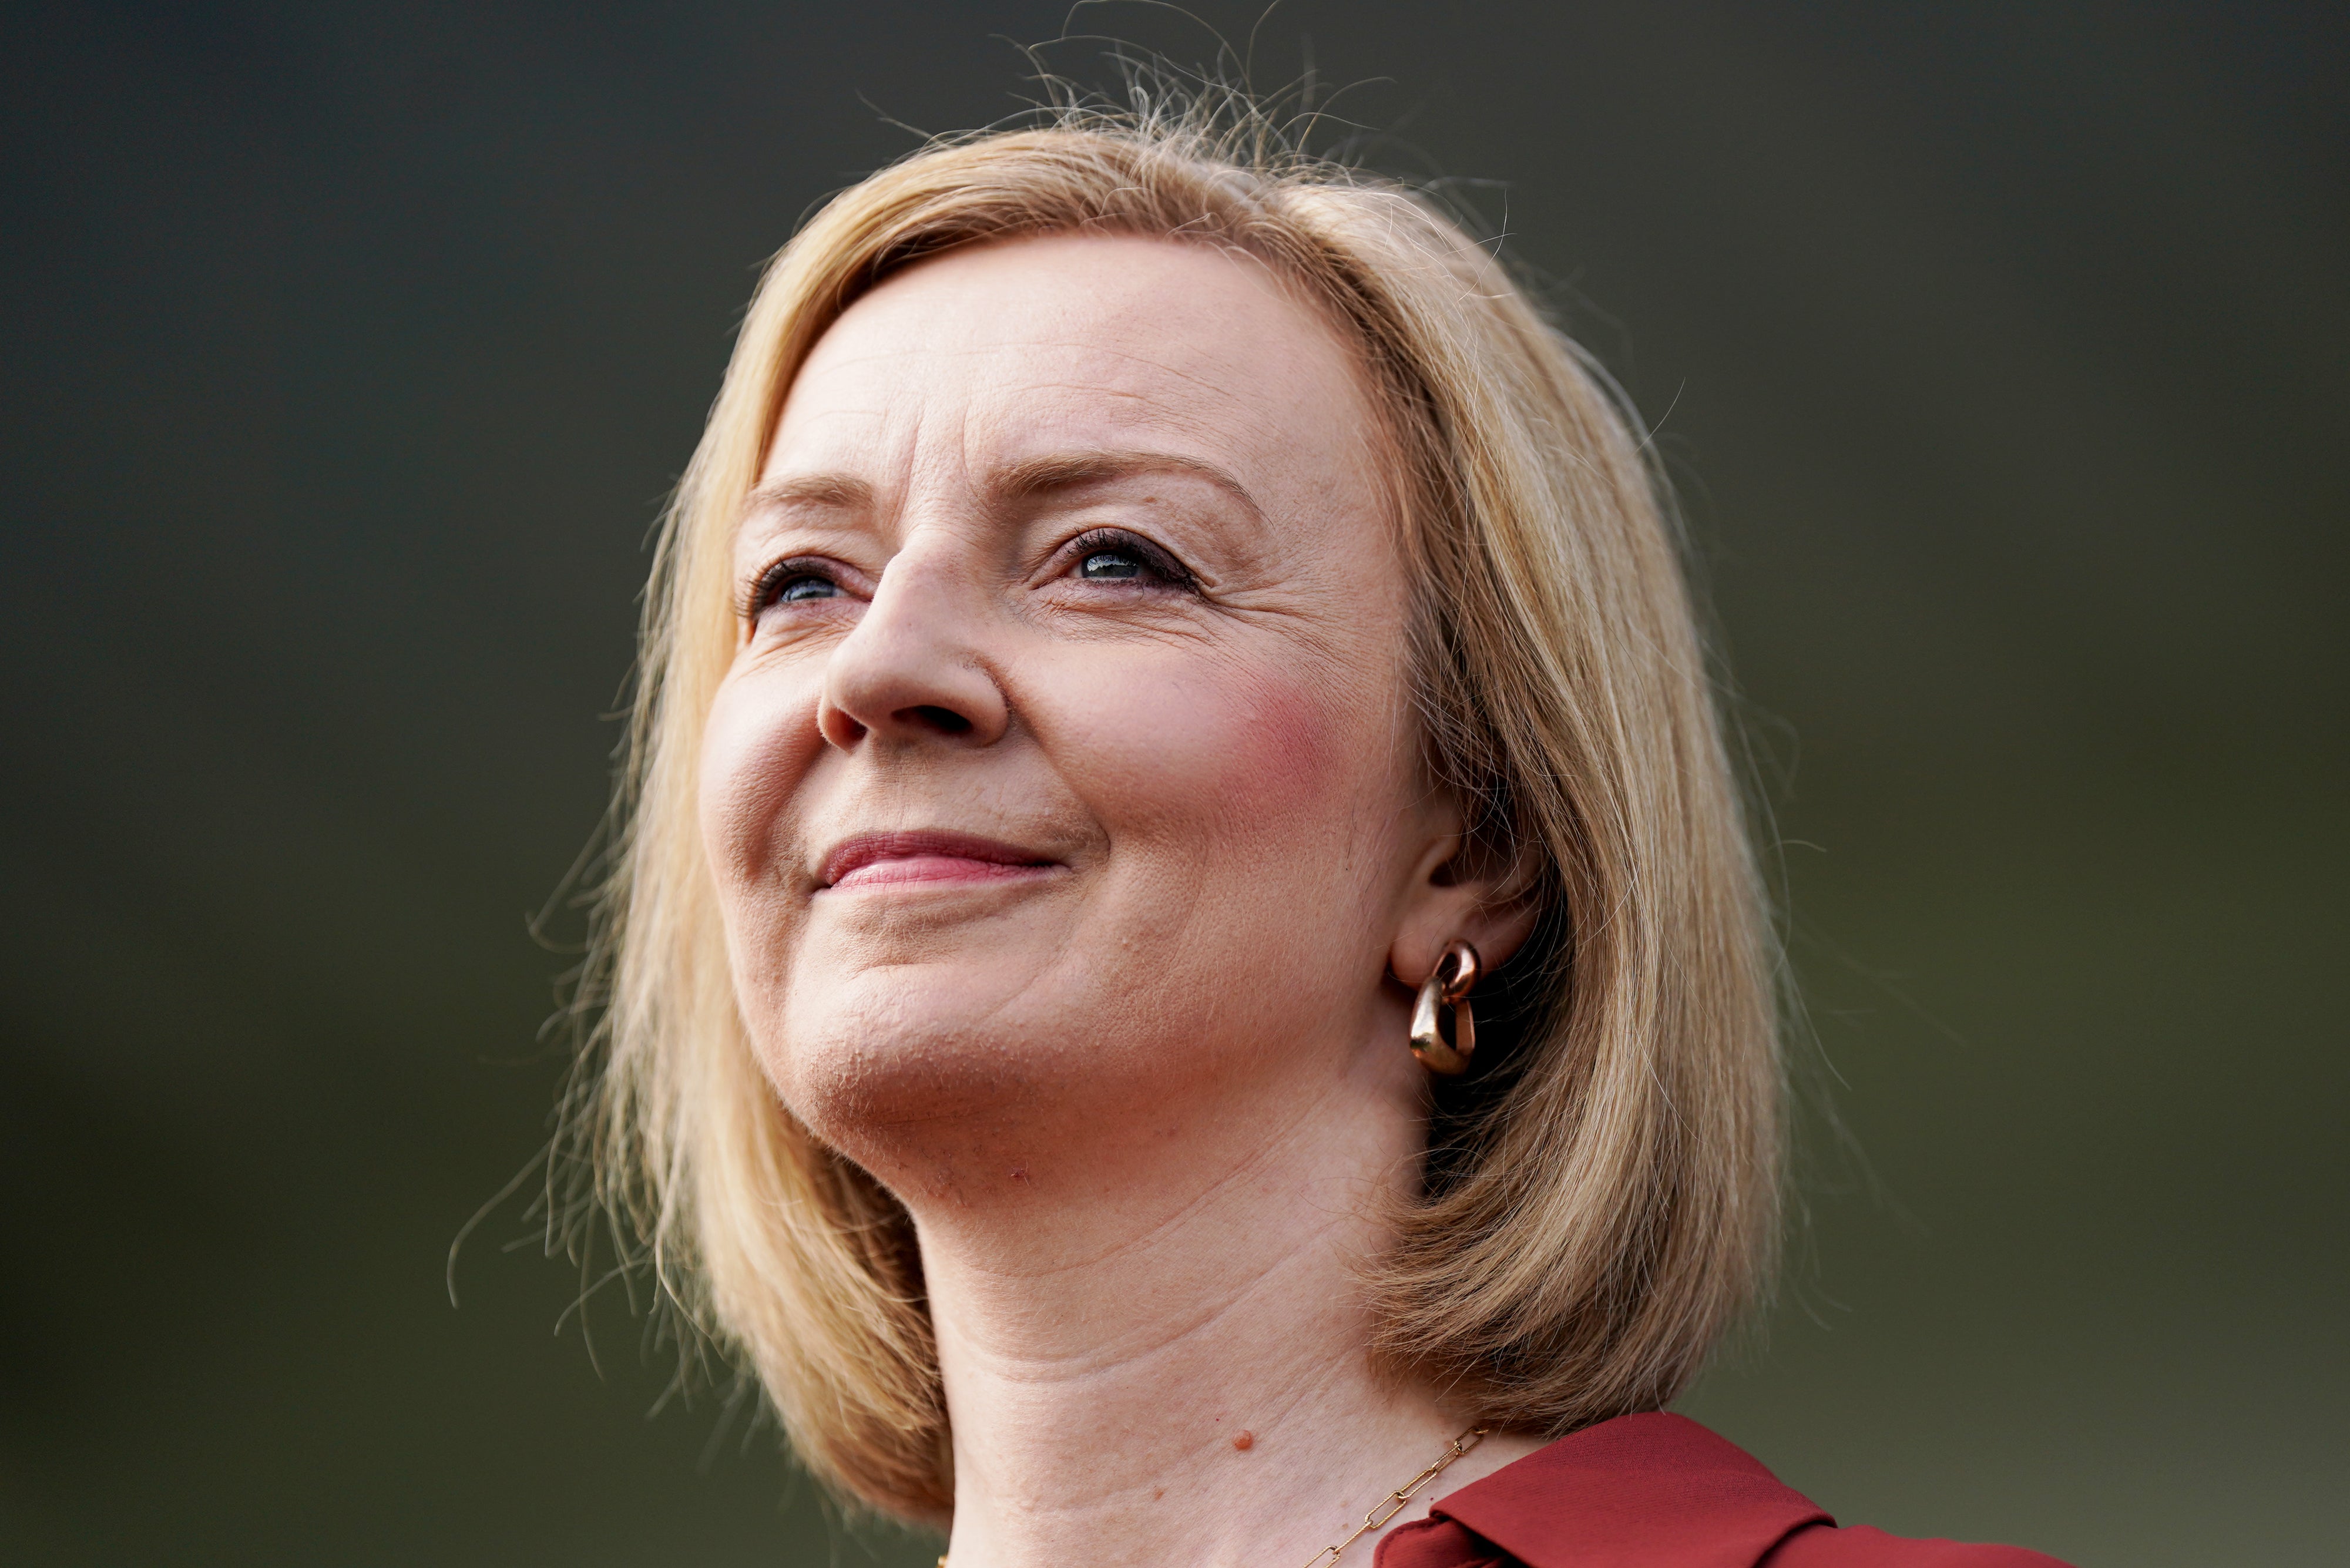 Truss is the current frontrunner in the Conservative leadership race